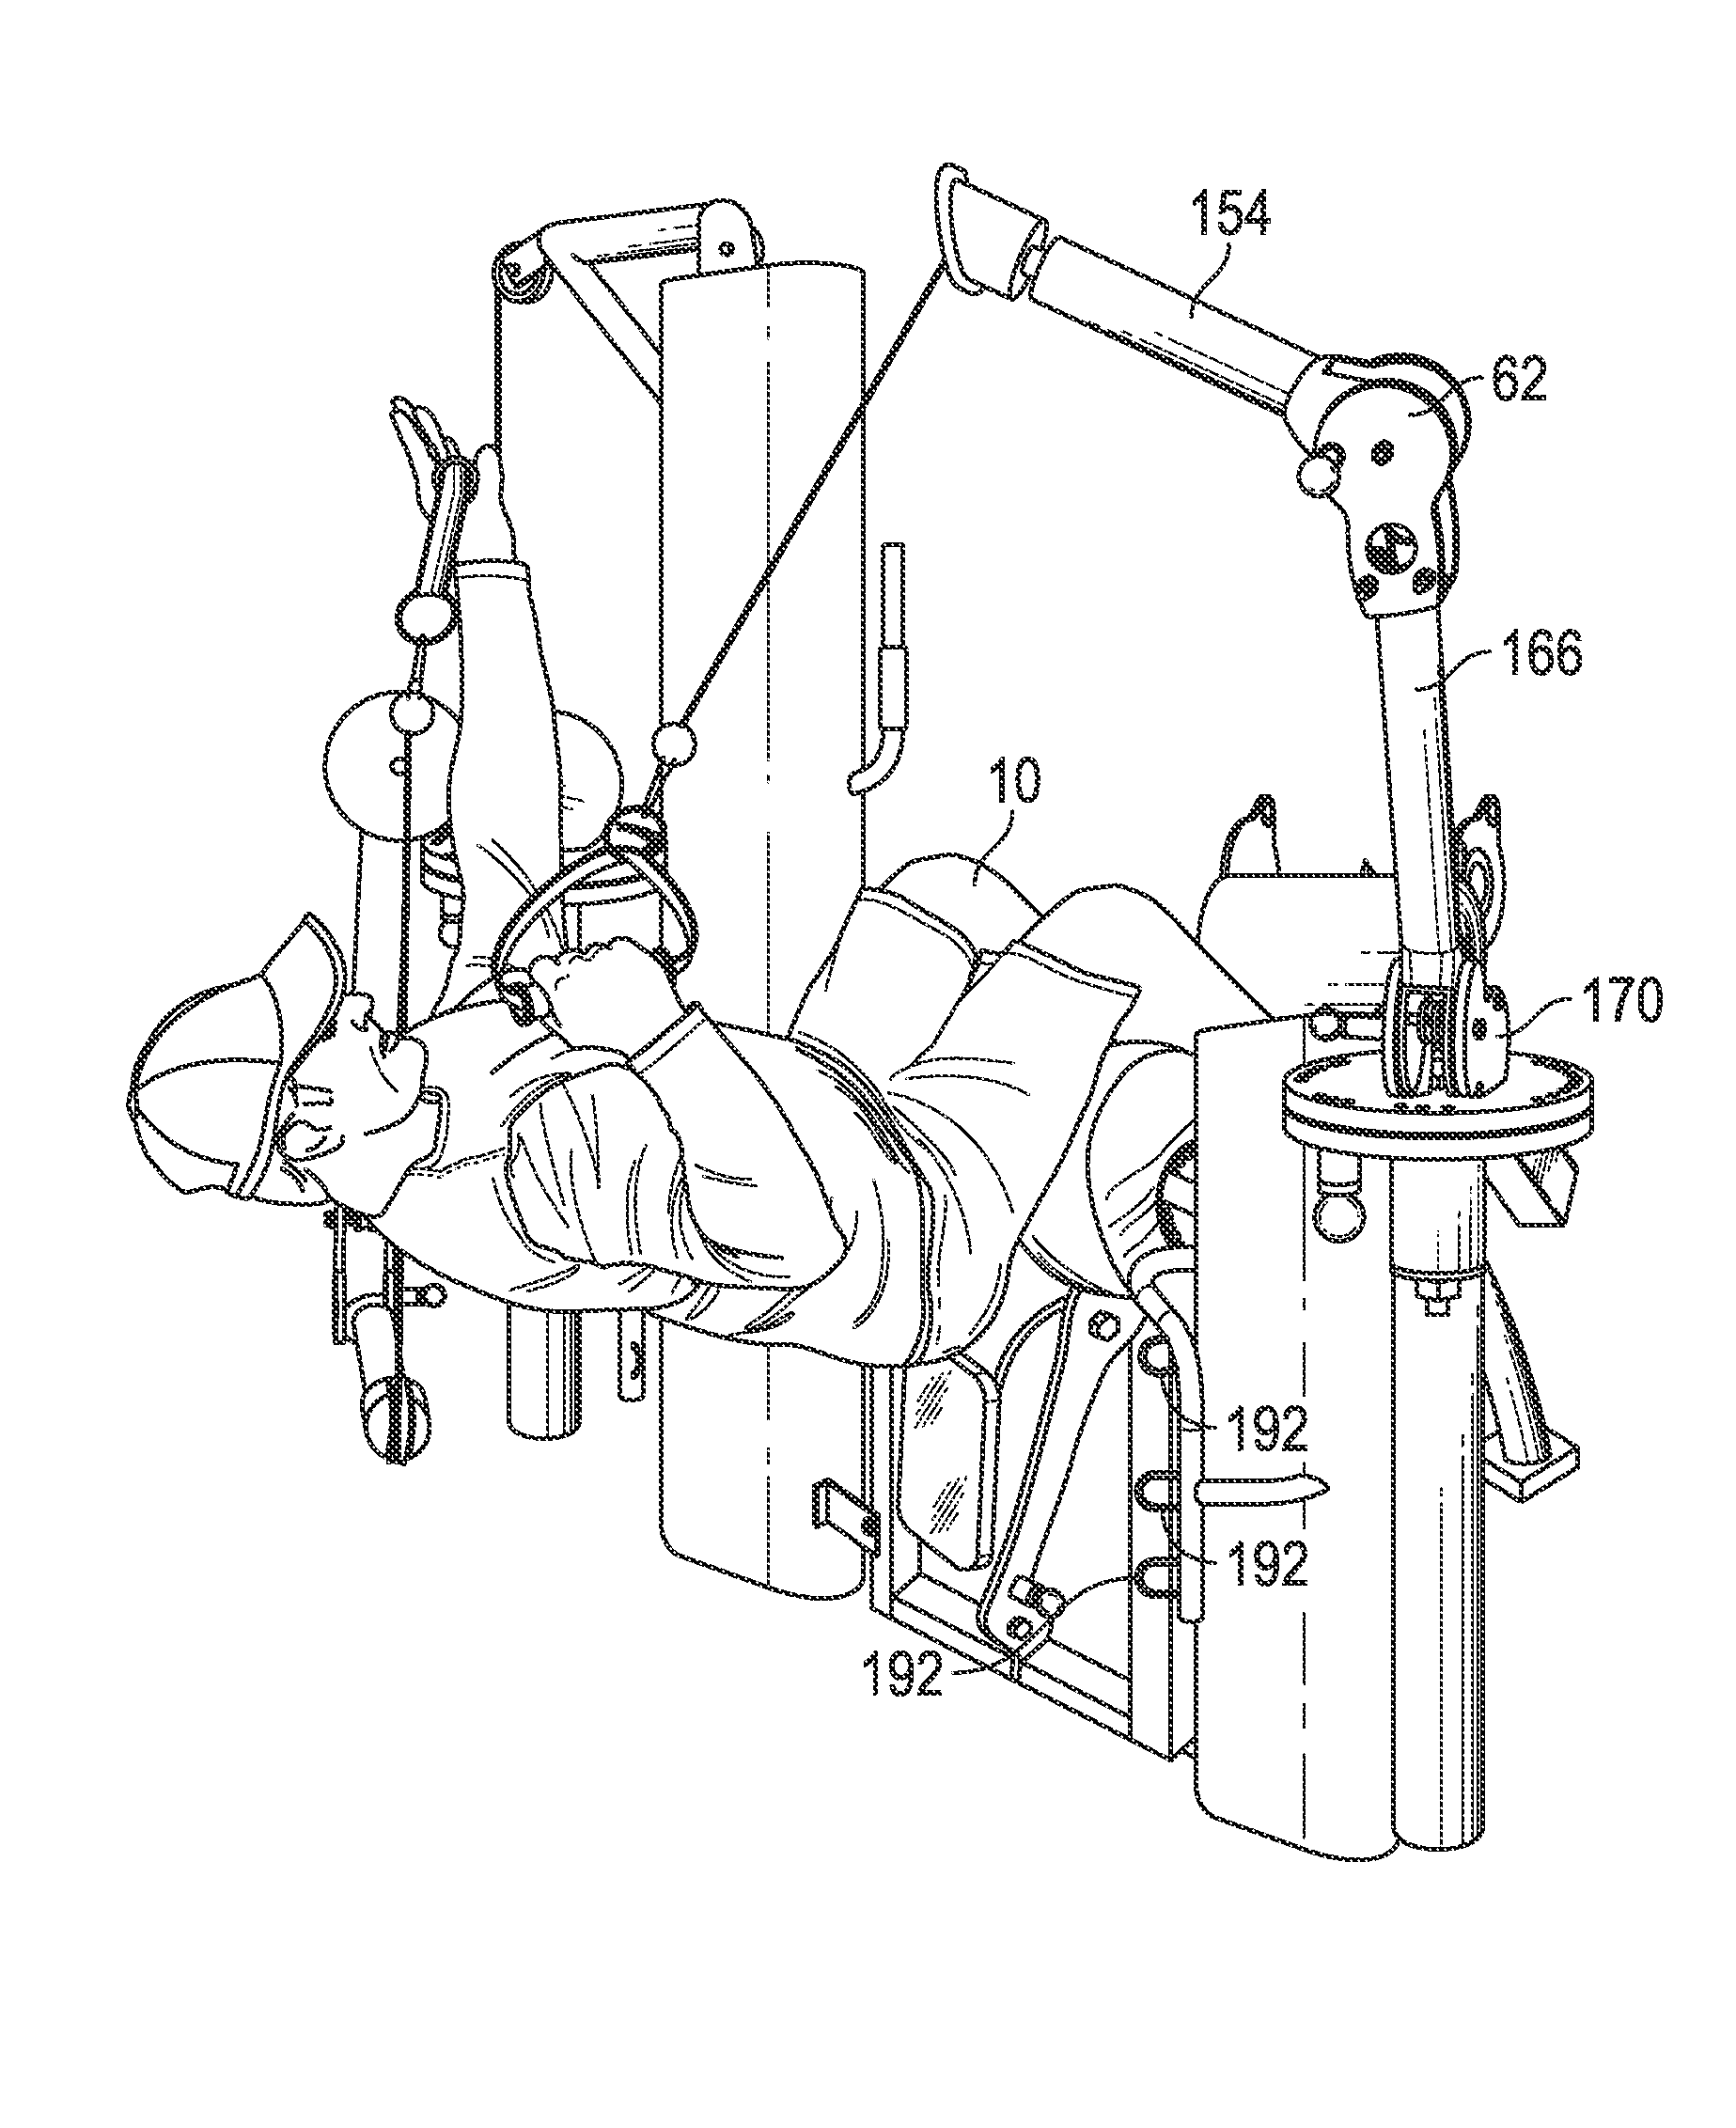 Unsupported pelvic/spine exercise system and method